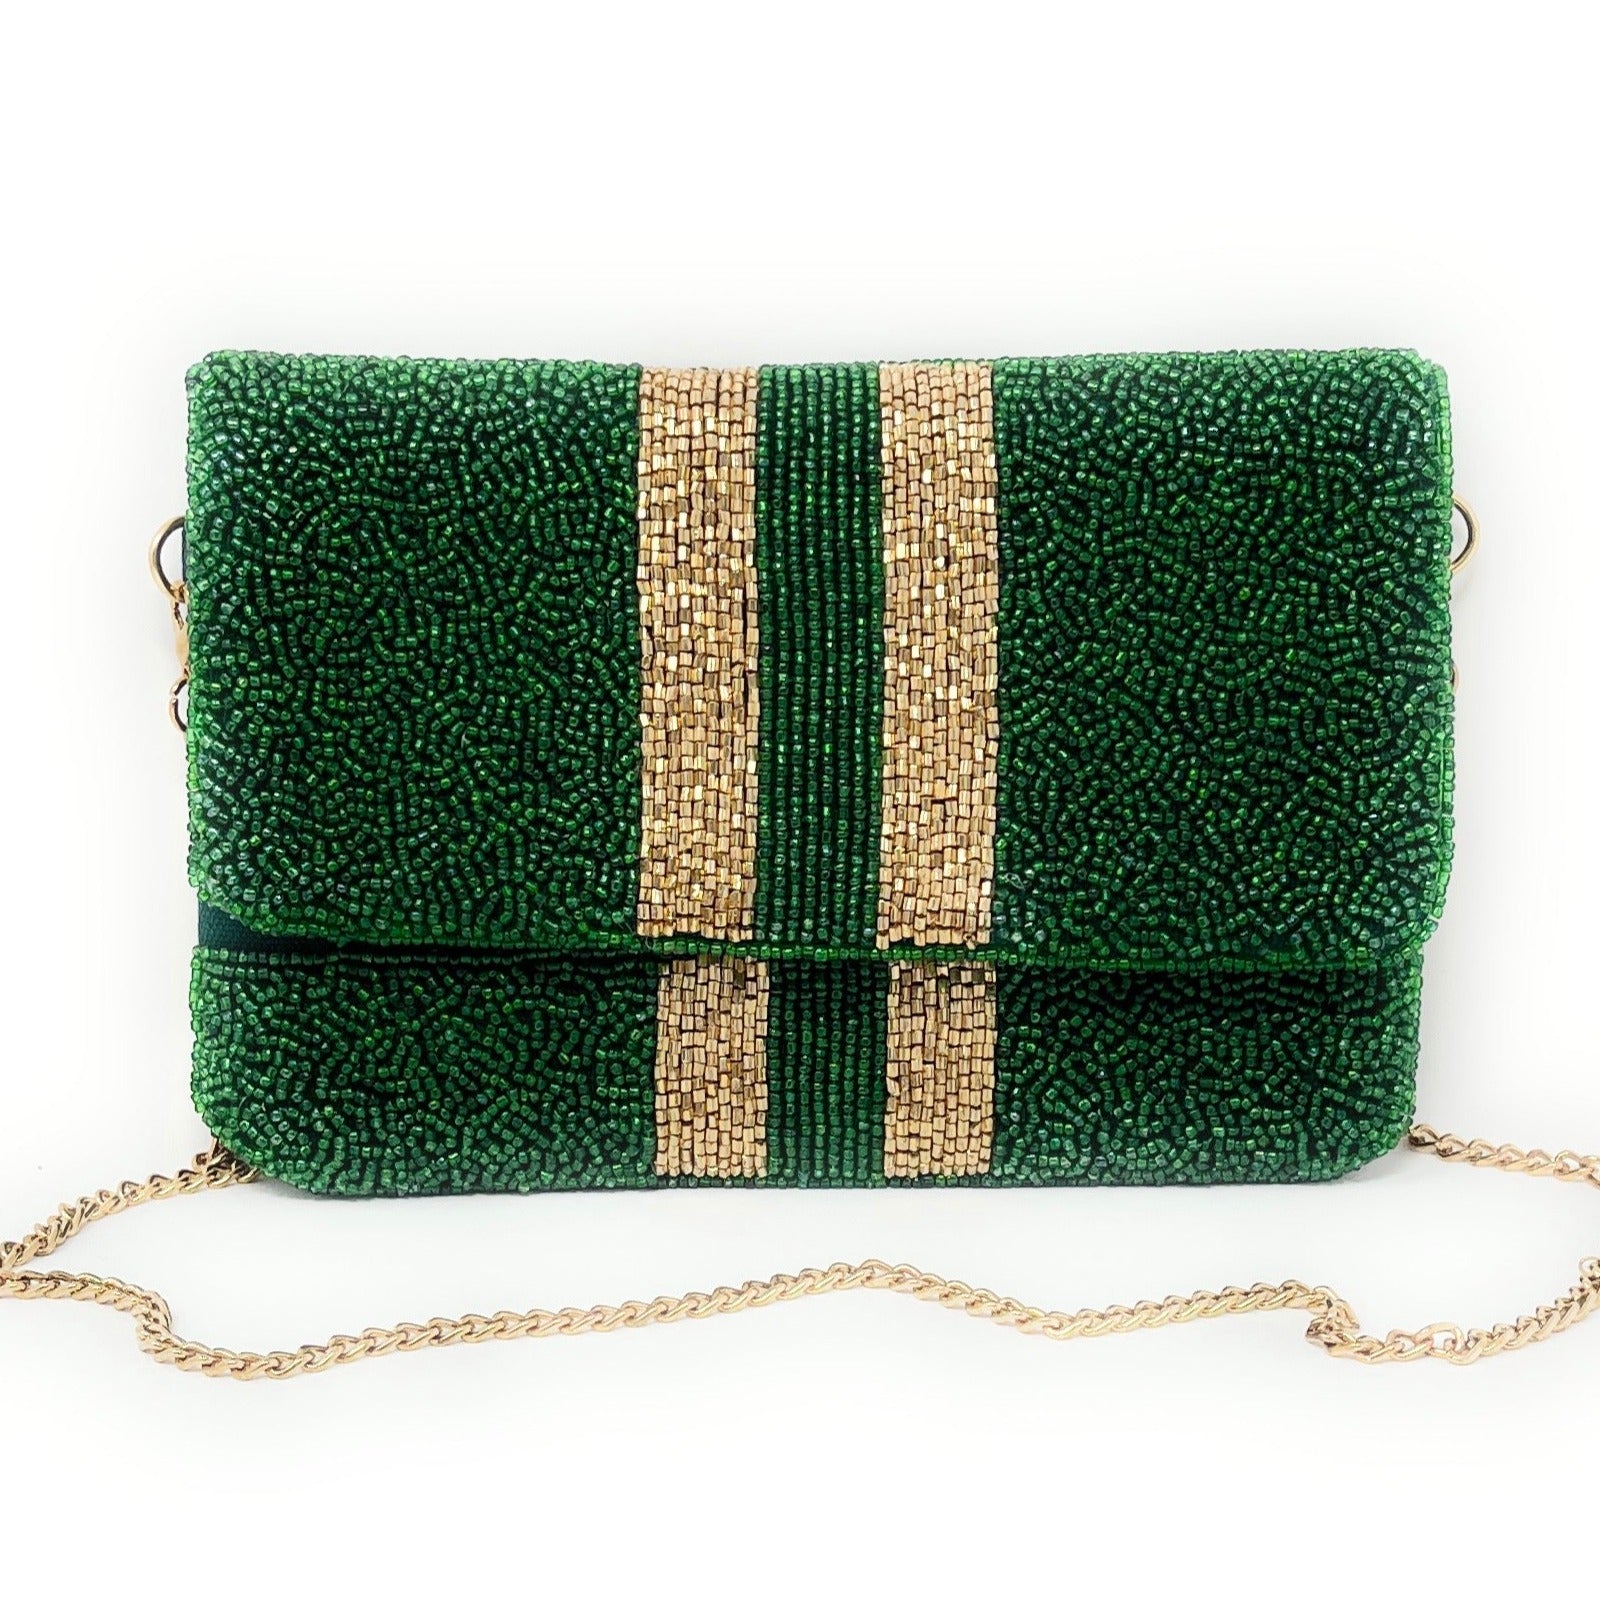 Green Clutch Purse, Crossbody Bag, Tailgating Handbags and Accessories